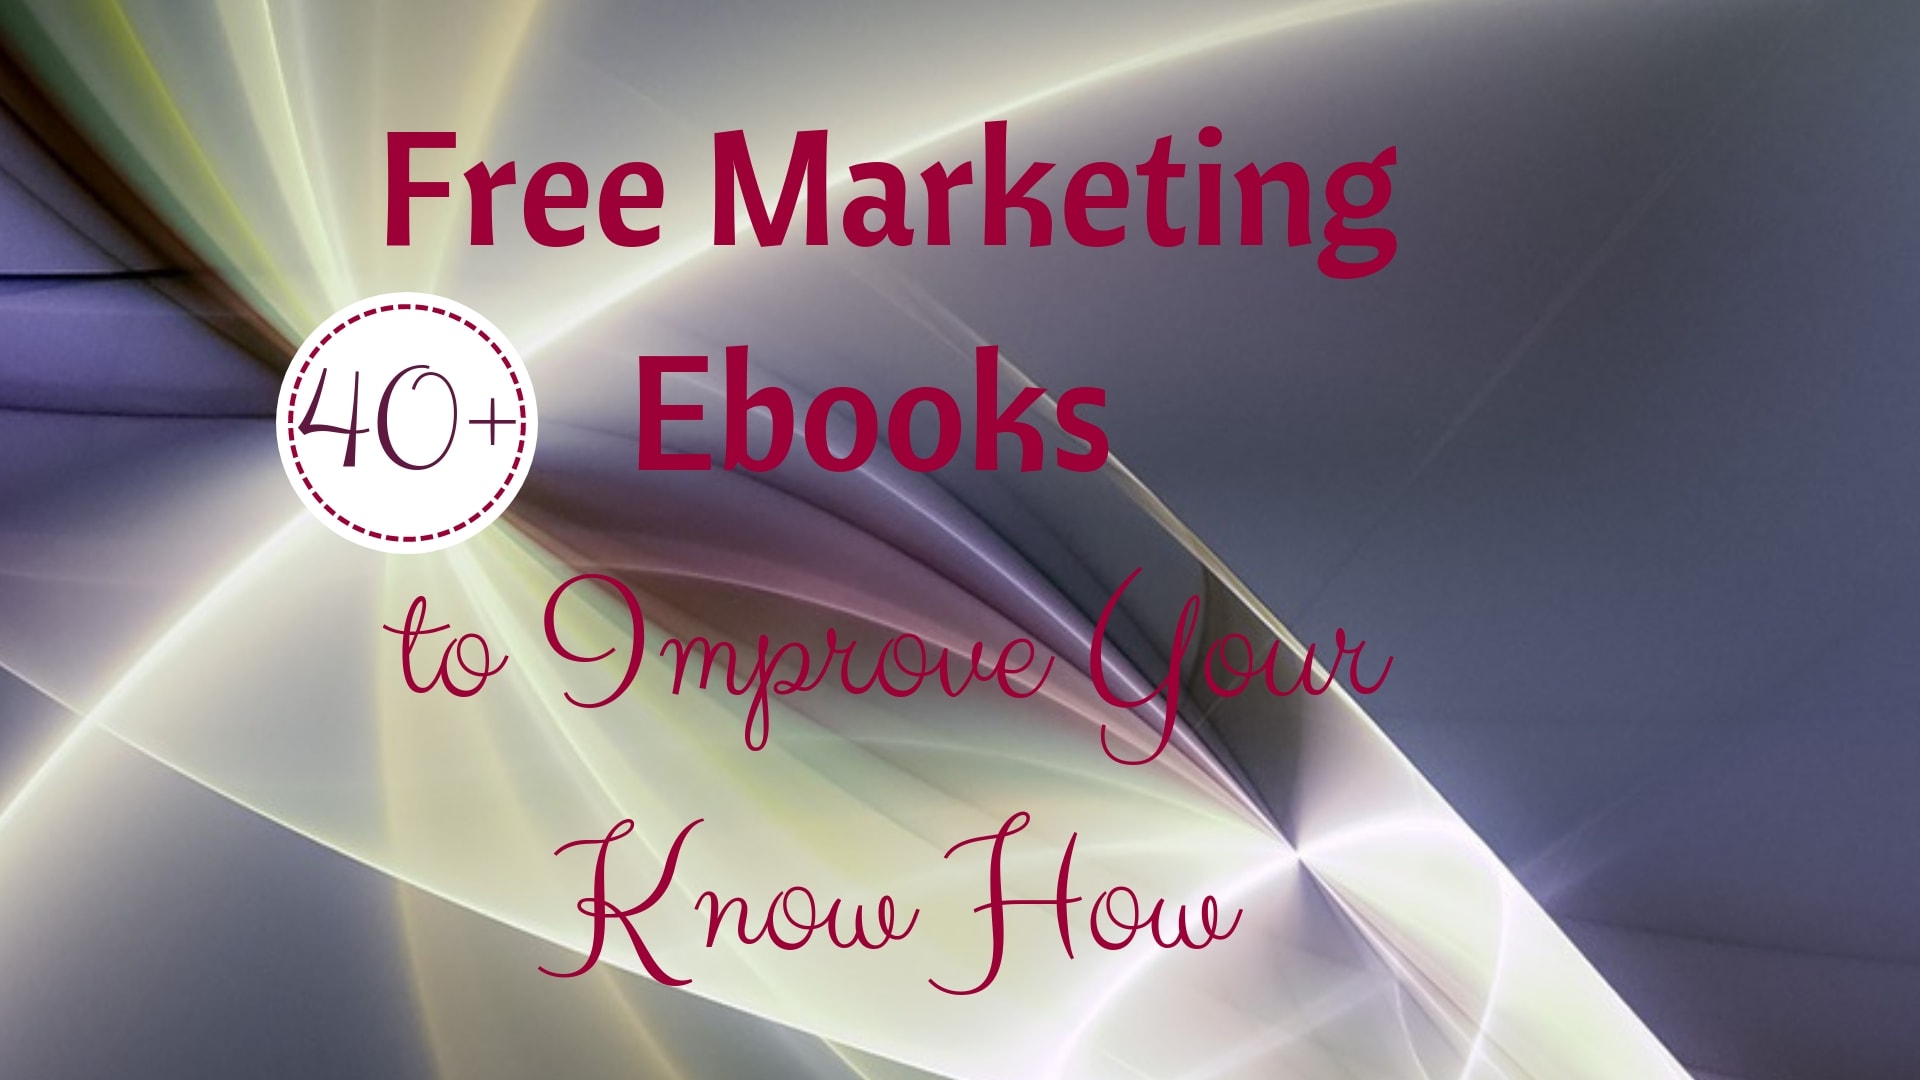 Digital Marketing Ebooks Free for Download to Improve Your Know-How